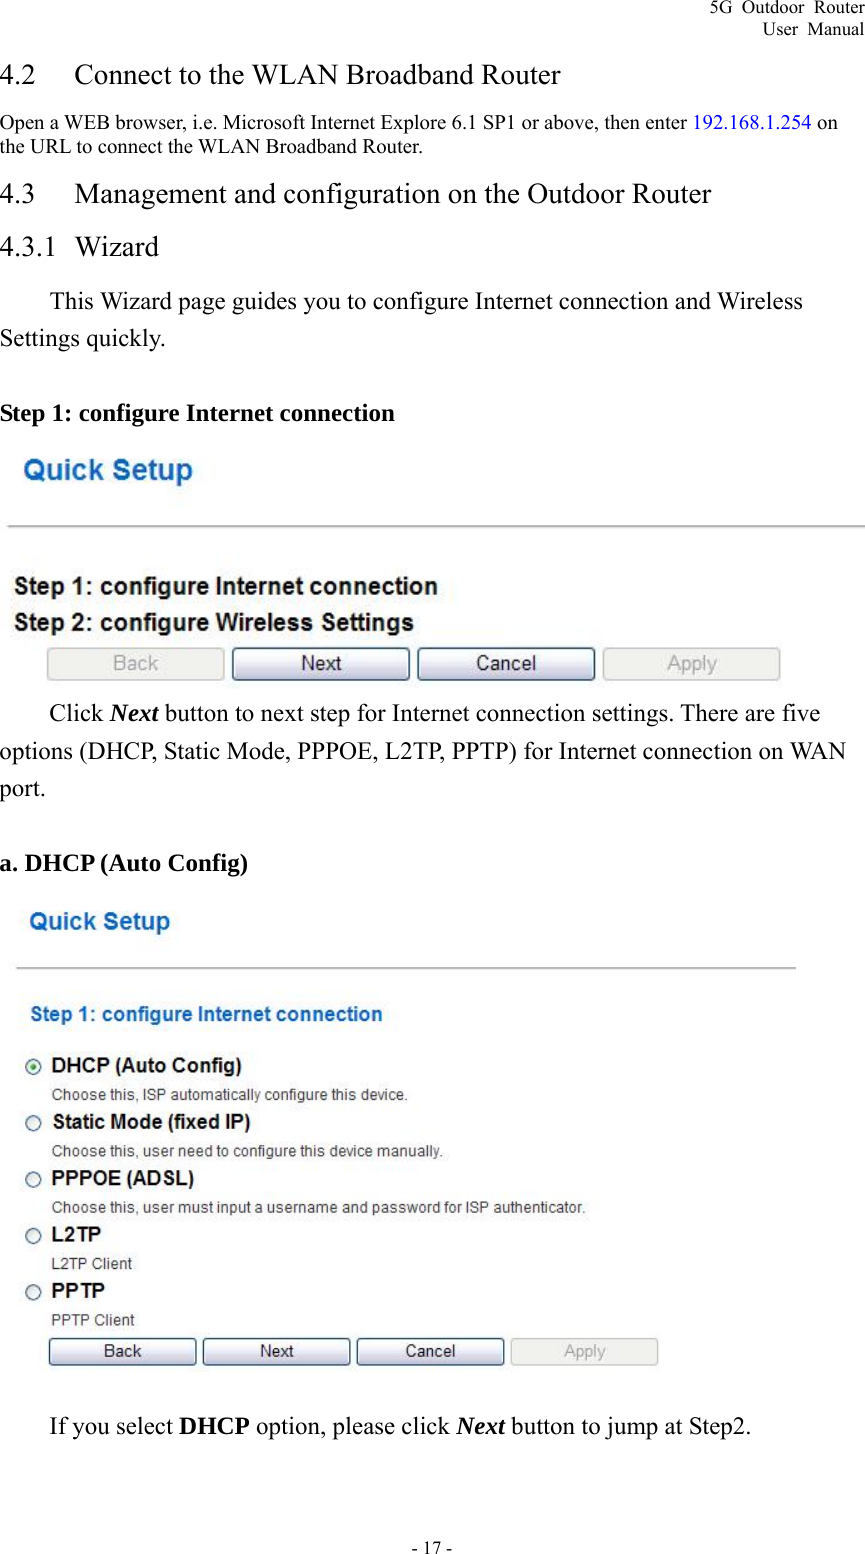 5G Outdoor Router User Manual - 17 - 4.2 Connect to the WLAN Broadband Router Open a WEB browser, i.e. Microsoft Internet Explore 6.1 SP1 or above, then enter 192.168.1.254 on the URL to connect the WLAN Broadband Router. 4.3 Management and configuration on the Outdoor Router 4.3.1 Wizard This Wizard page guides you to configure Internet connection and Wireless Settings quickly.  Step 1: configure Internet connection   Click Next button to next step for Internet connection settings. There are five options (DHCP, Static Mode, PPPOE, L2TP, PPTP) for Internet connection on WAN port.  a. DHCP (Auto Config)    If you select DHCP option, please click Next button to jump at Step2.  